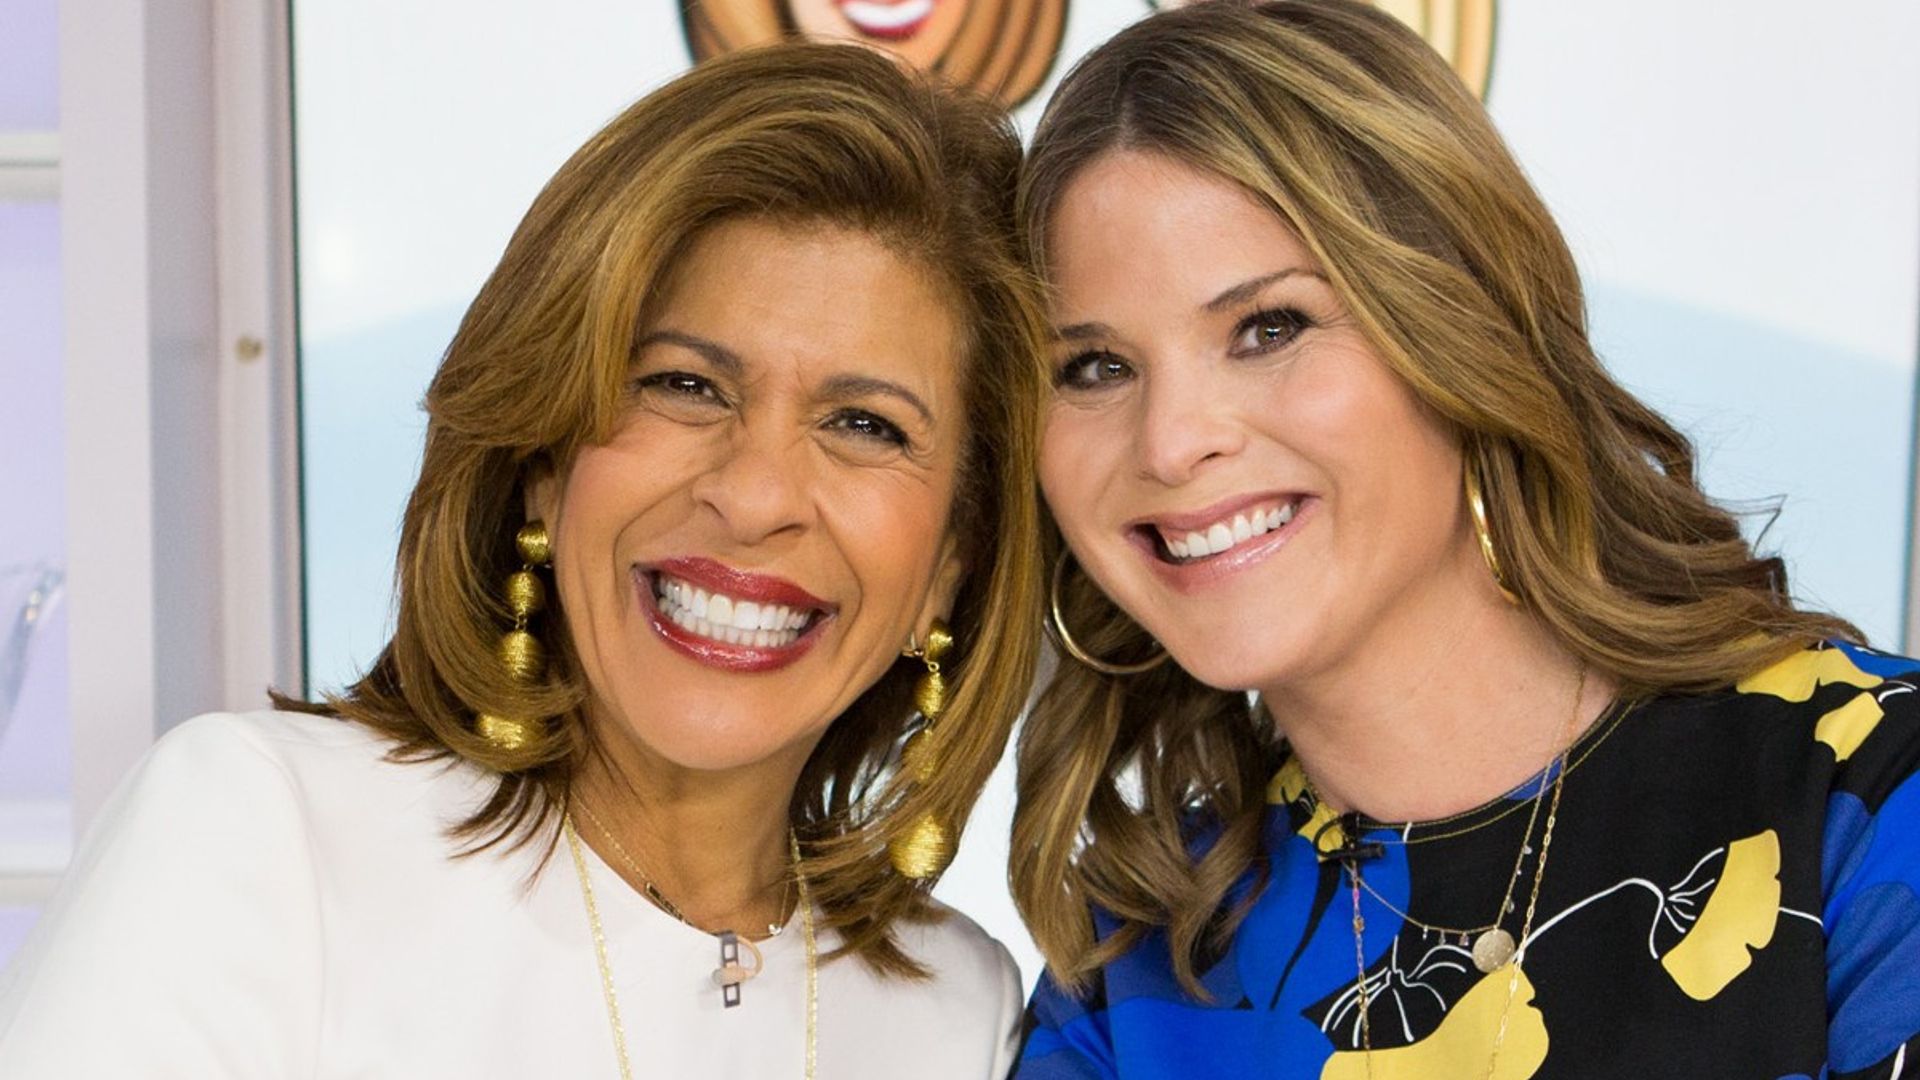 Today’s Hoda Kotb and Jenna Bush Hager break down in tears live on air after moving tribute